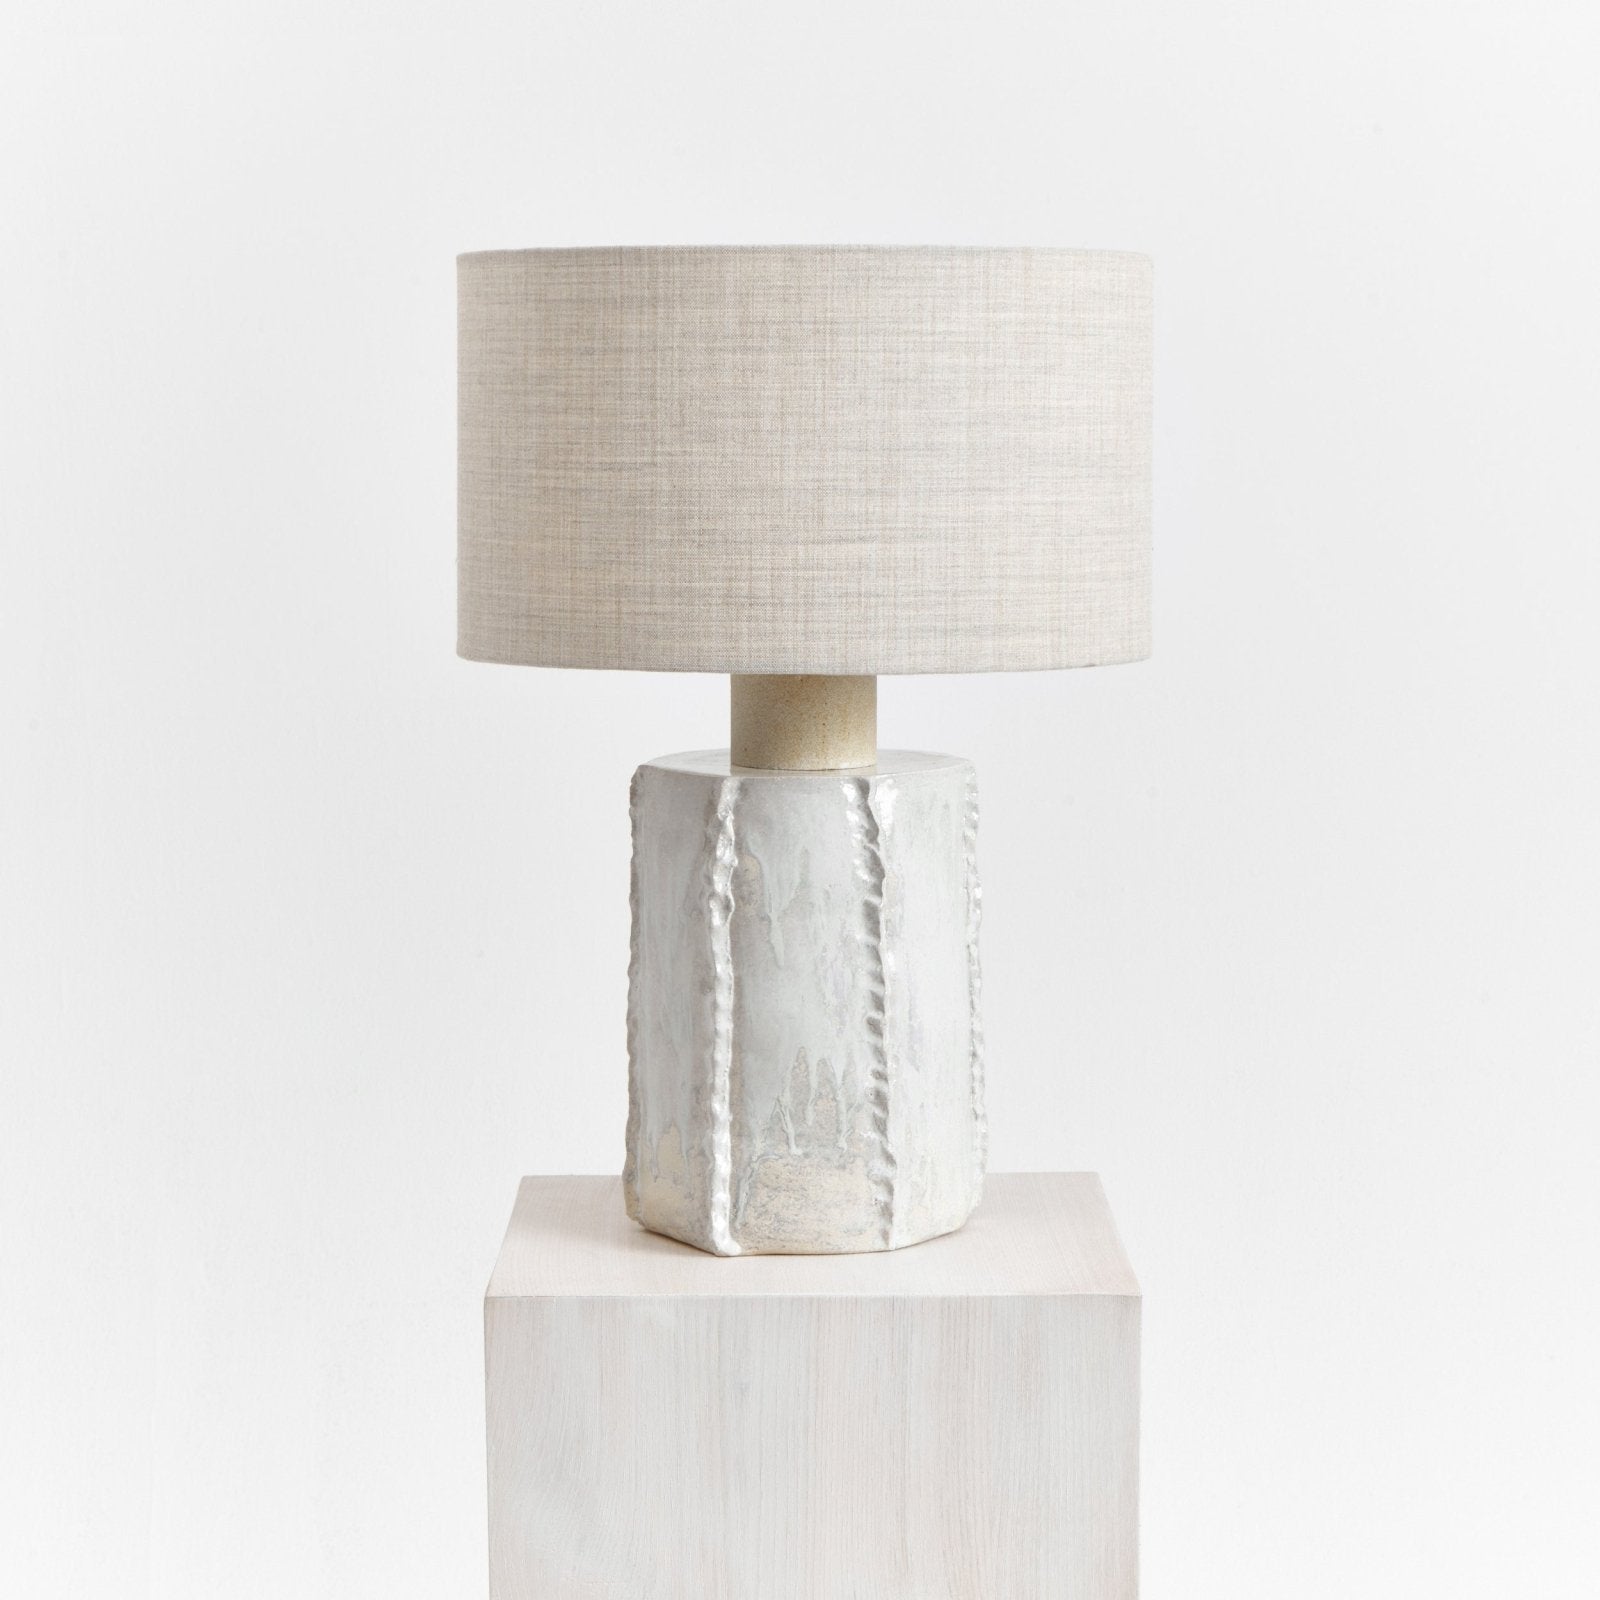 Totem - Table lamp Accessories by Project 213A